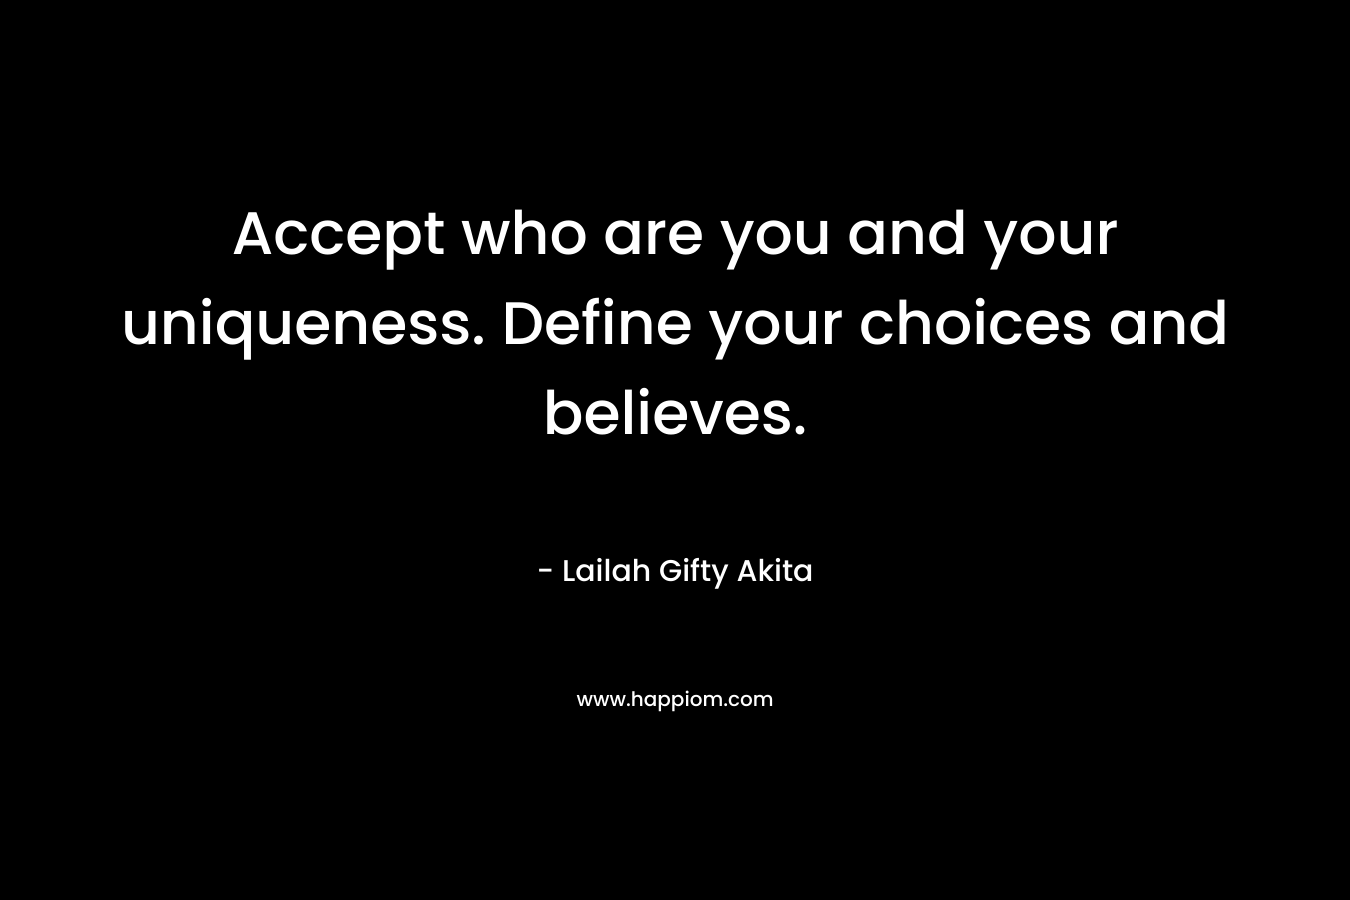 Accept who are you and your uniqueness. Define your choices and believes.